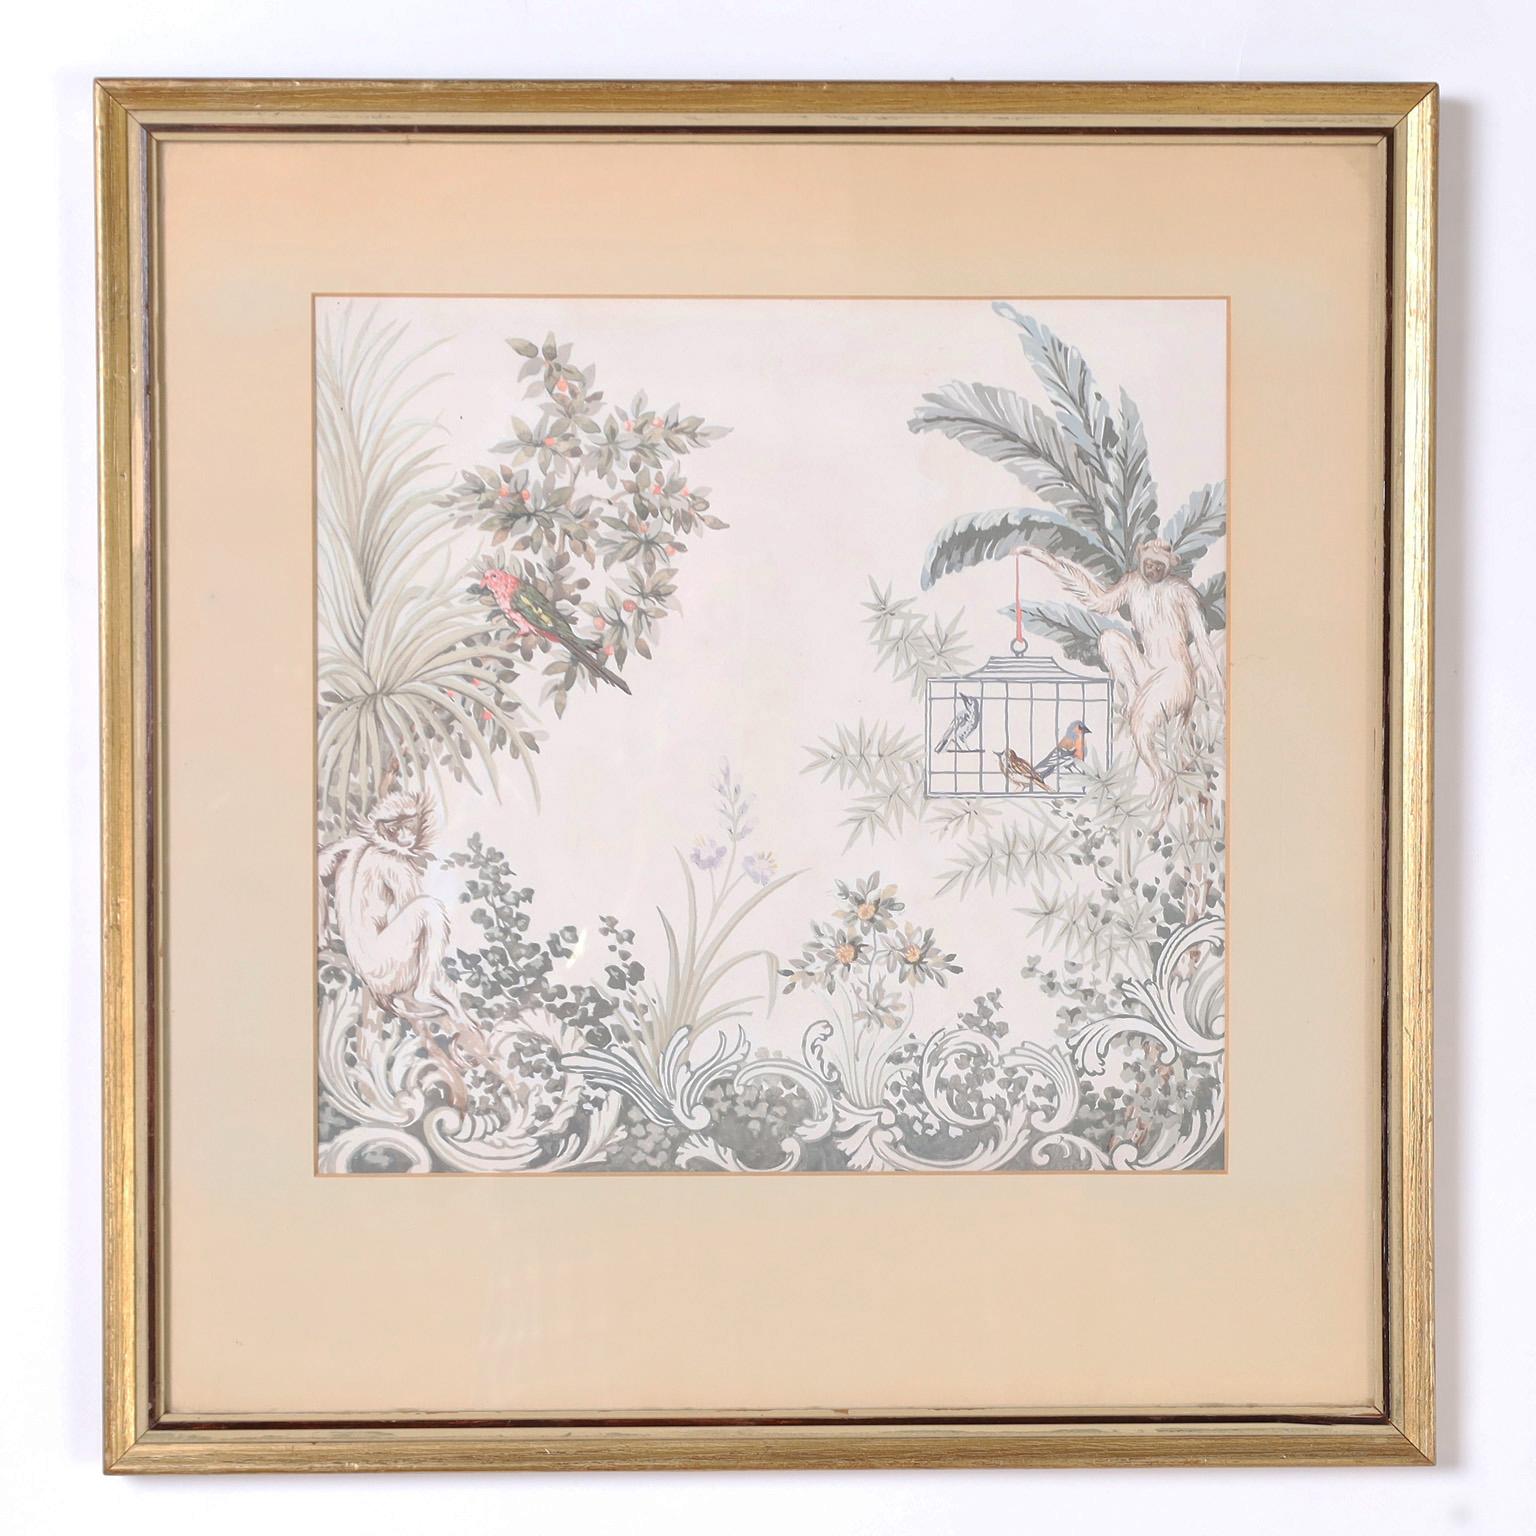 Lofty pair of watercolors executed with delicate subtle hand depicting tropical scenes with flowers, birds and monkeys. By noted muralist Harley Henoch and presented in gilt wood frames under glass.